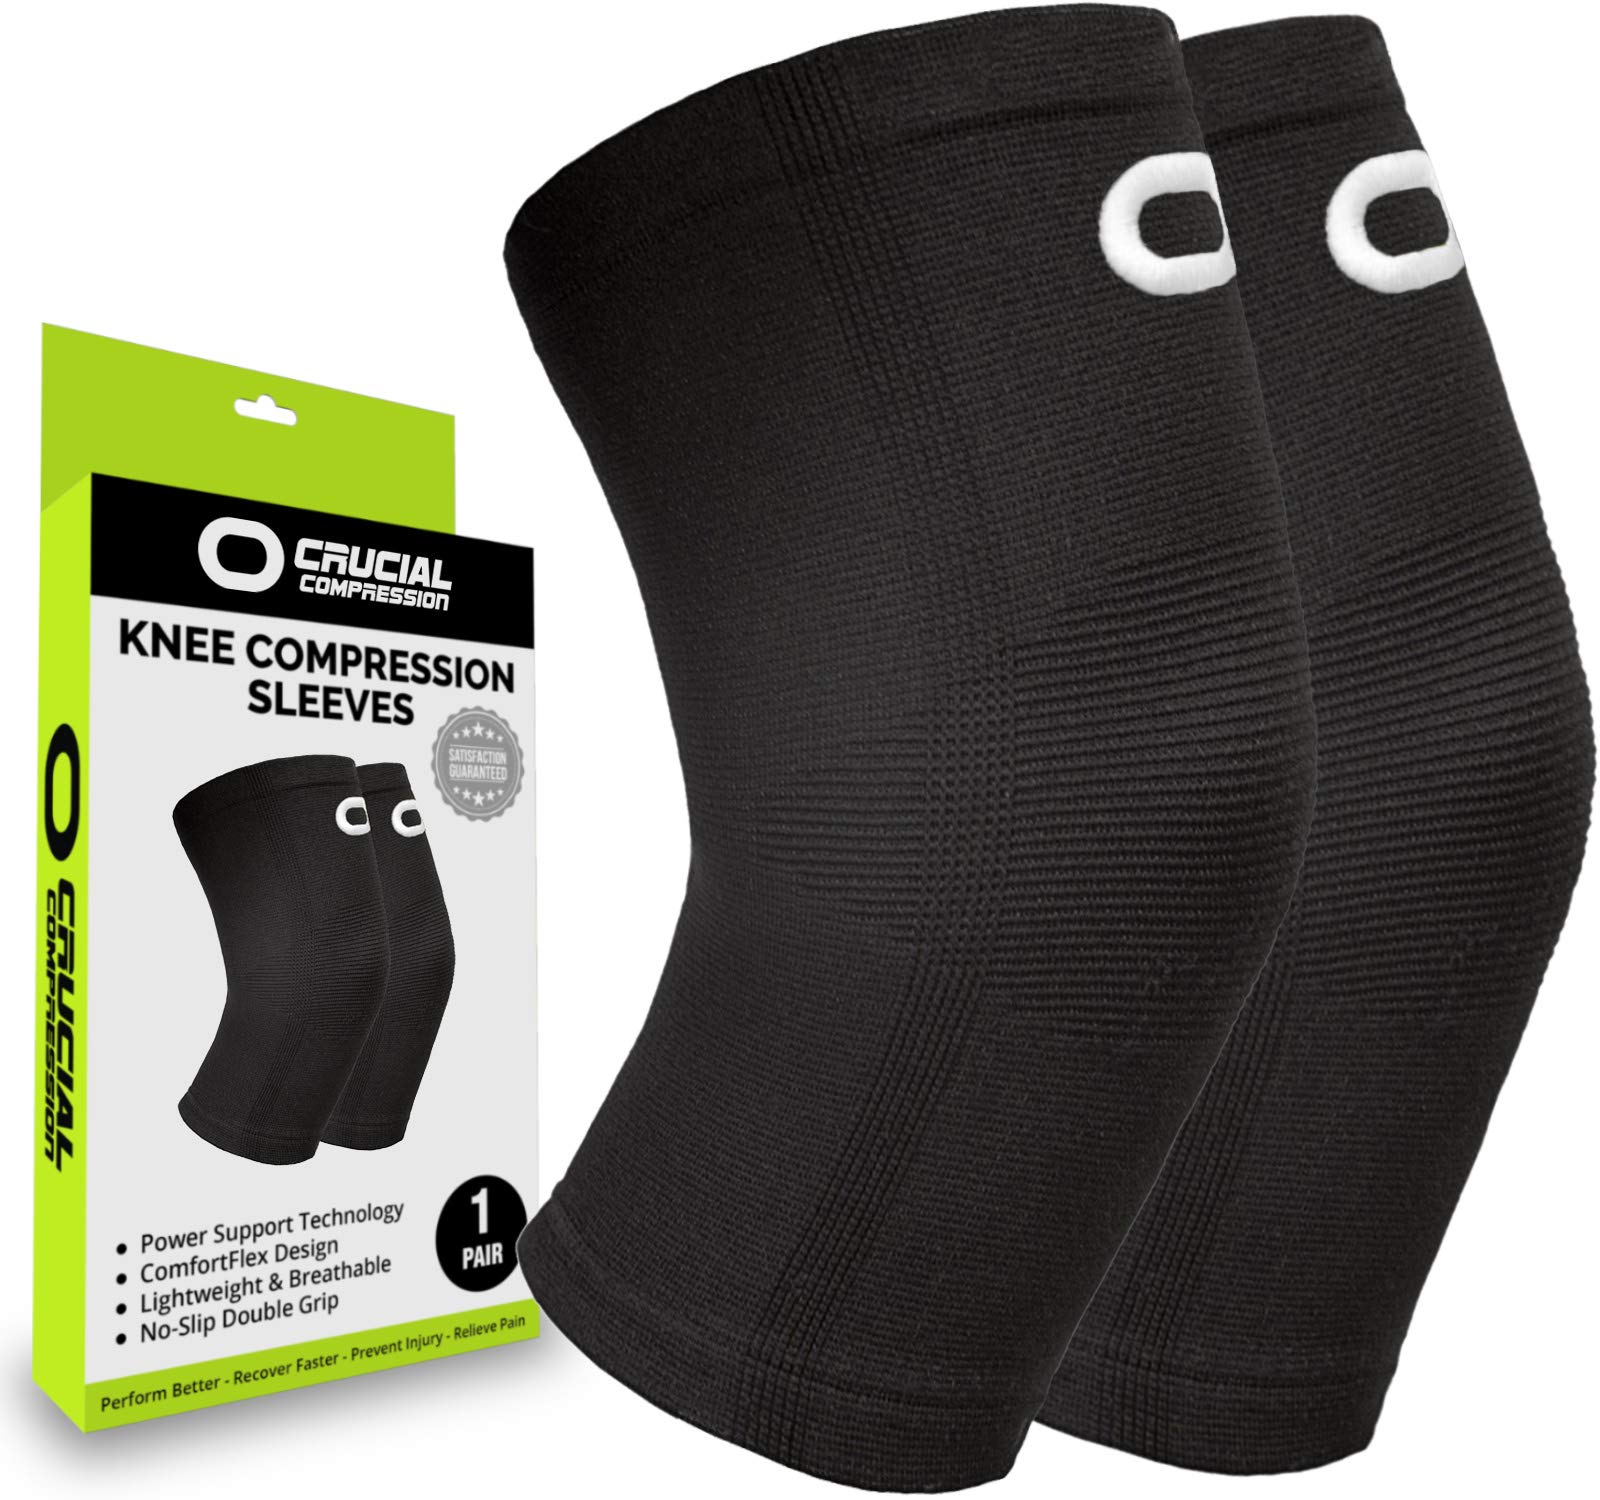 Crucial Compression Knee Sleeve (1 Pair) - Best Knee Braces for